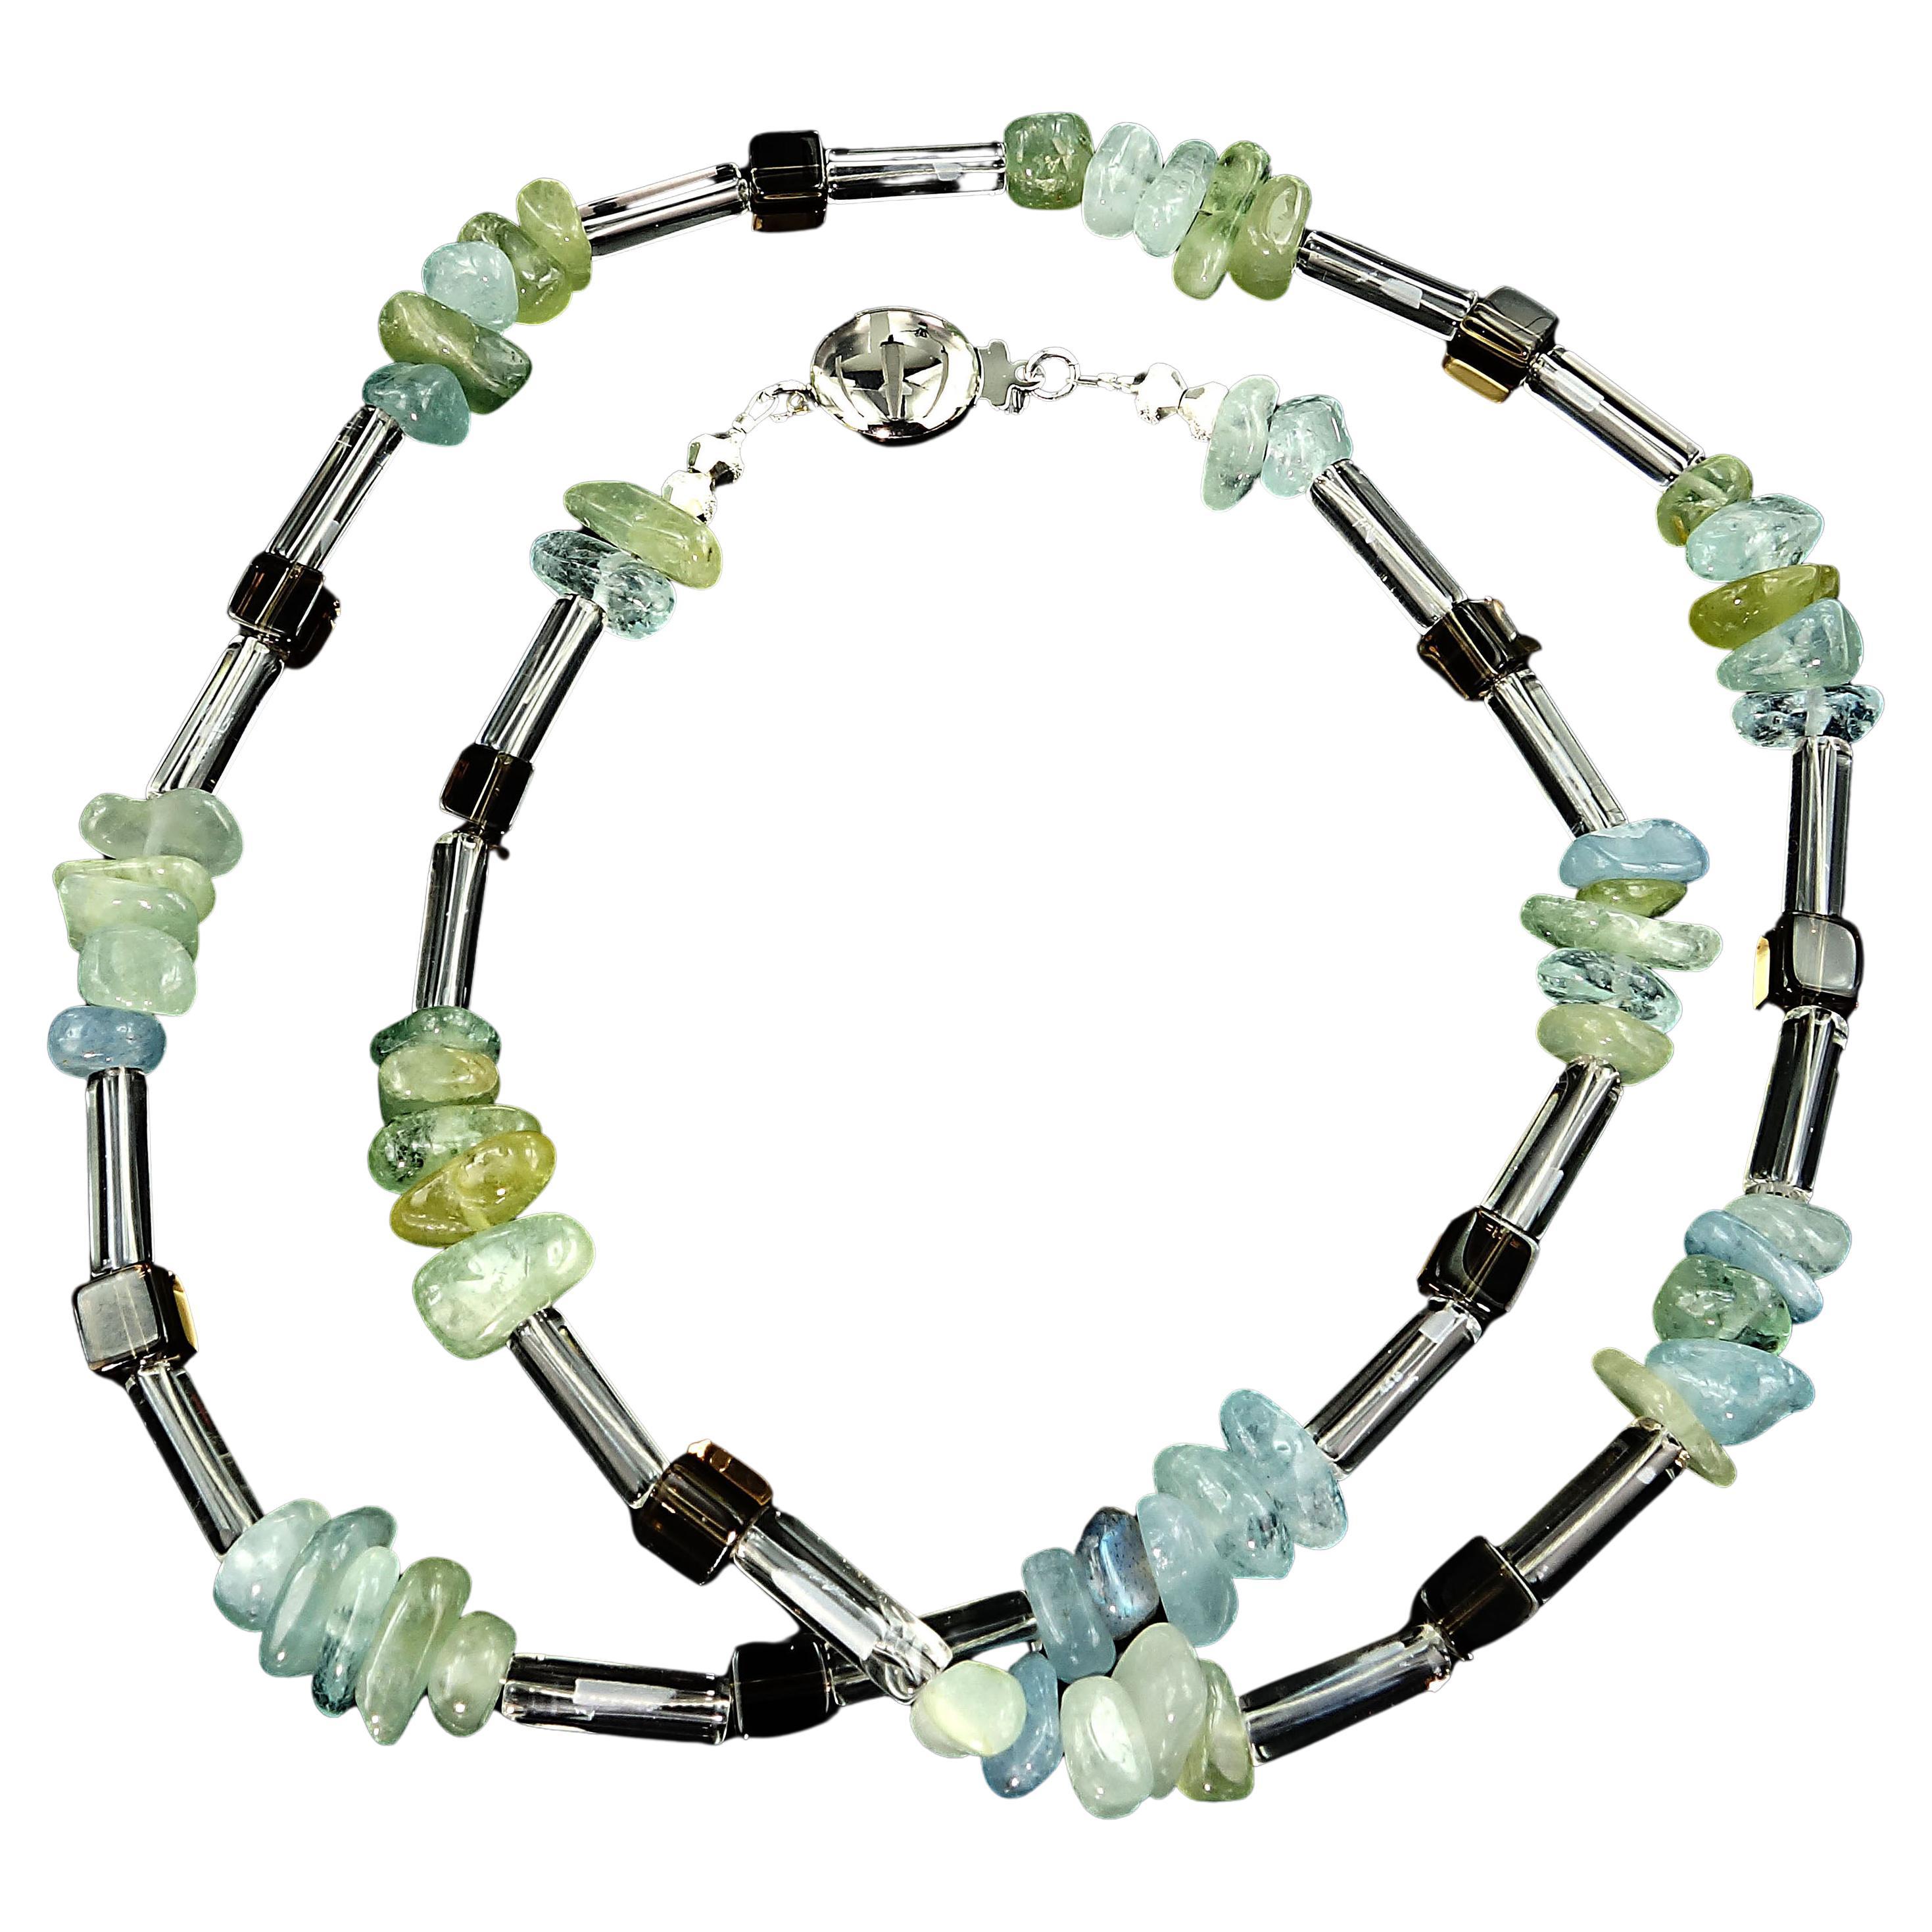 Versatile necklace of highly polished Aquamarine chips, transparent squares of Smoky Quartz and tubes of Crystal. These gorgeous nuggets of Aquamarine vary in color from light blue through deeper blue and into green.  The Smoky Quartz are clean and